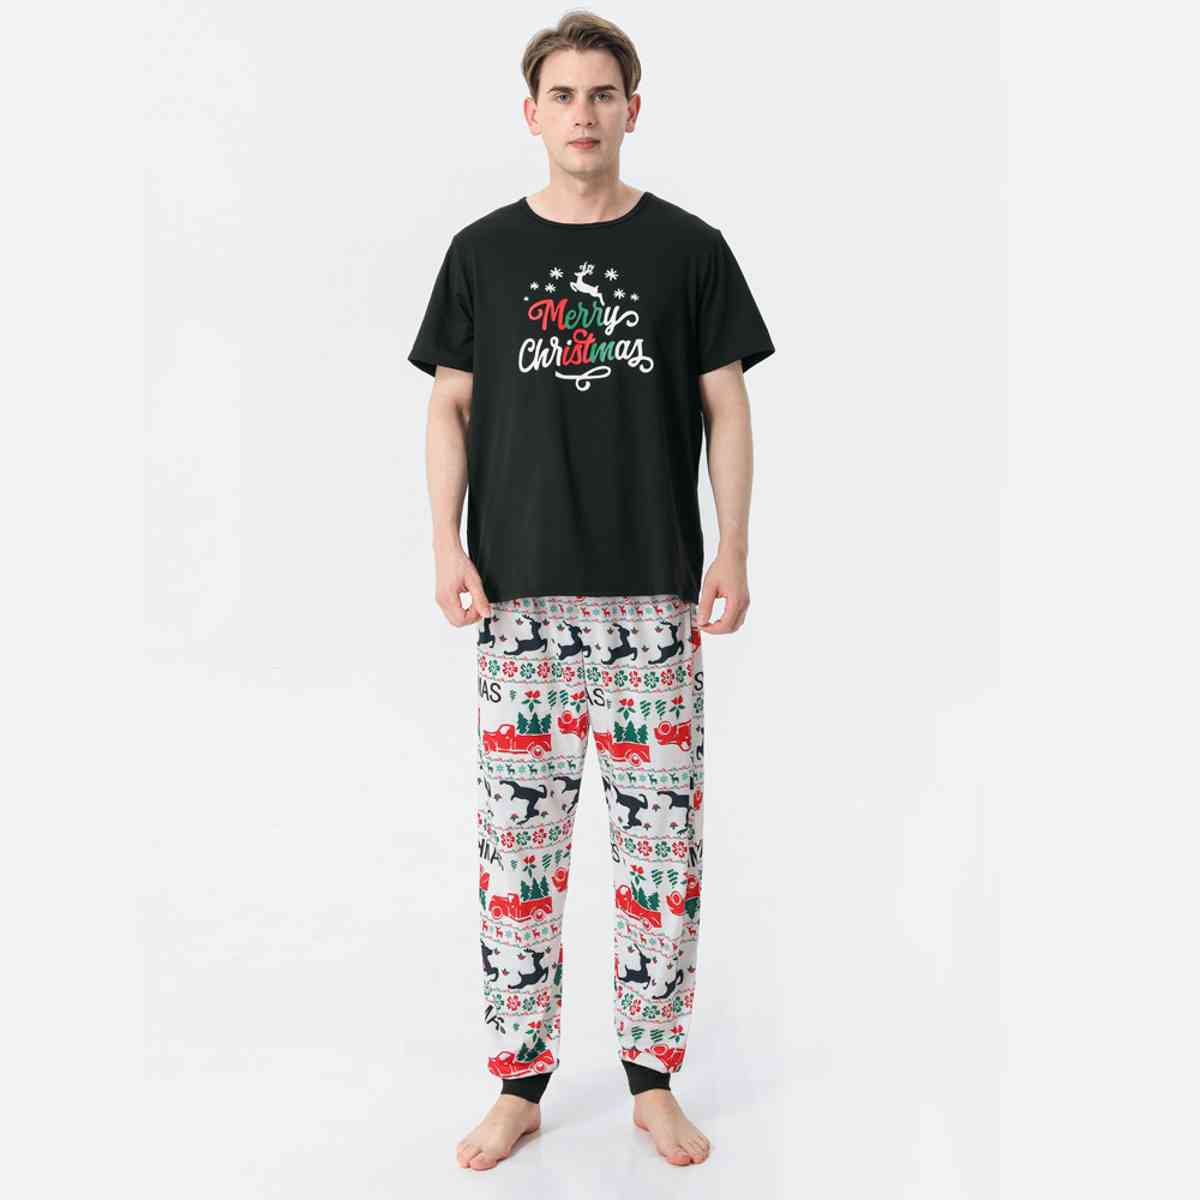 MERRY CHRISTMAS Graphic Top and Printed Pajama Set for Men  Krazy Heart Designs Boutique Black M 